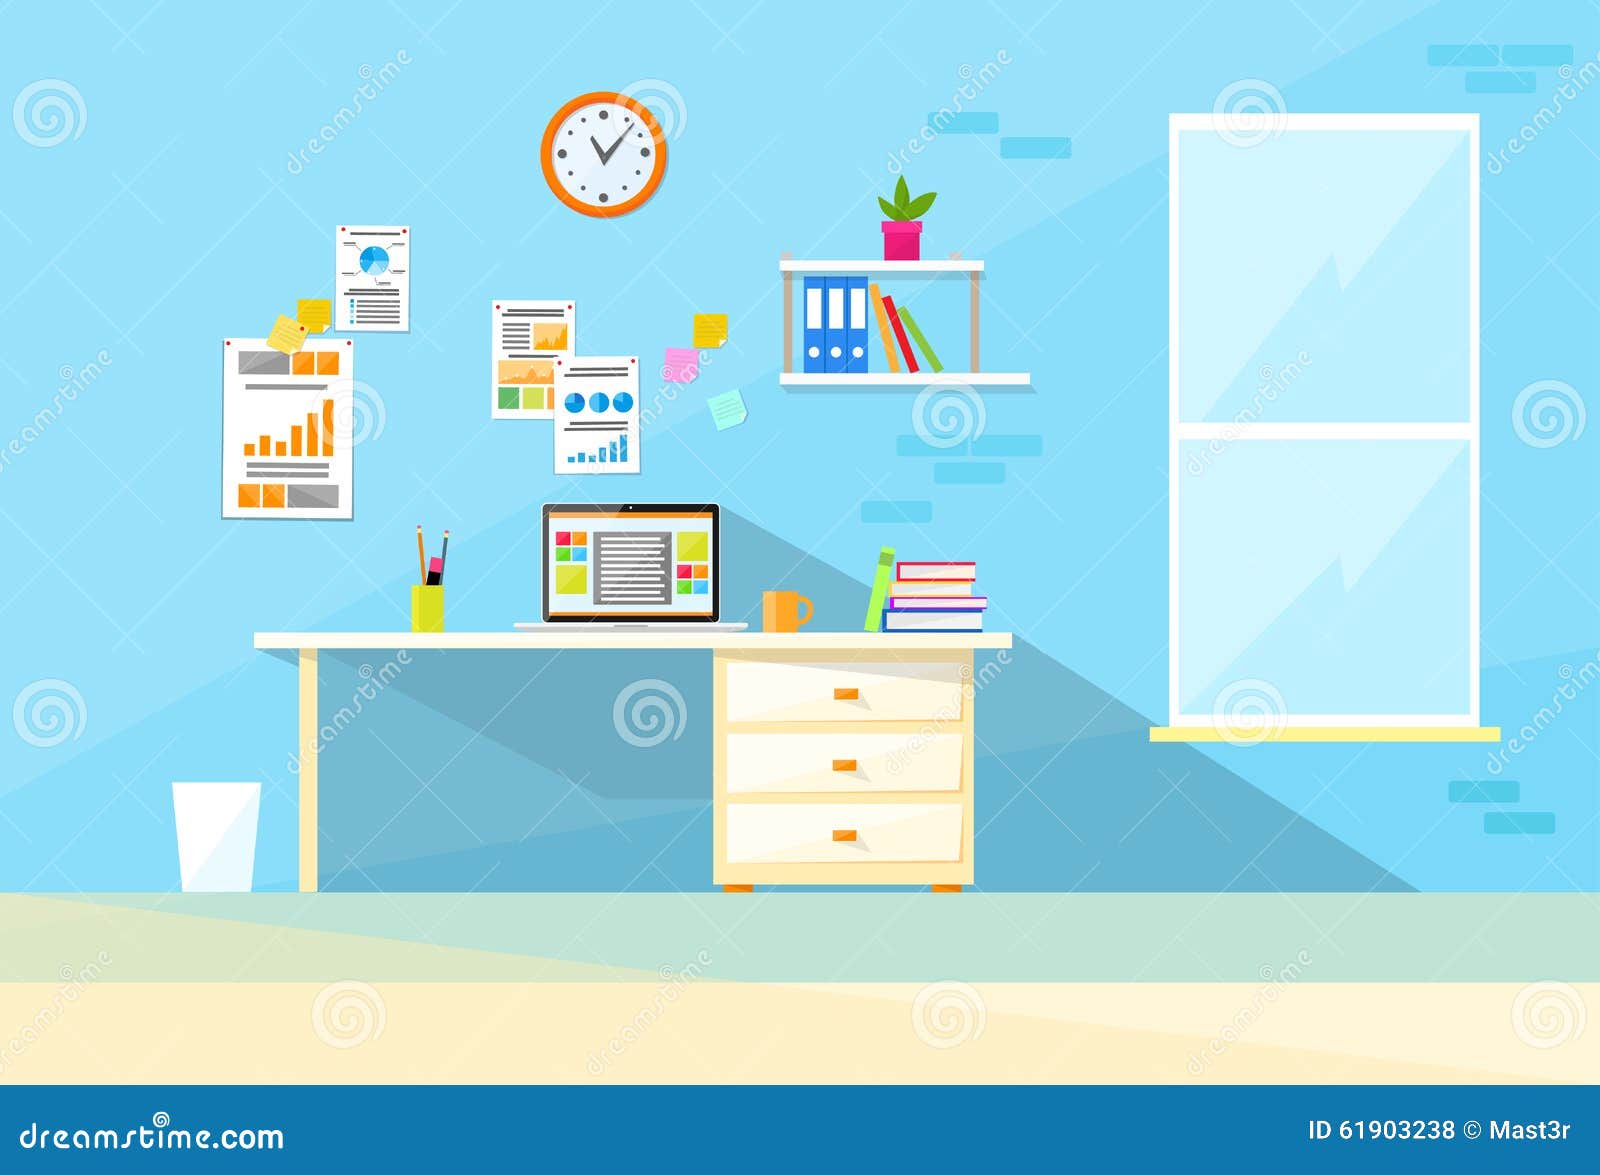 microsoft office clipart and stock images - photo #23